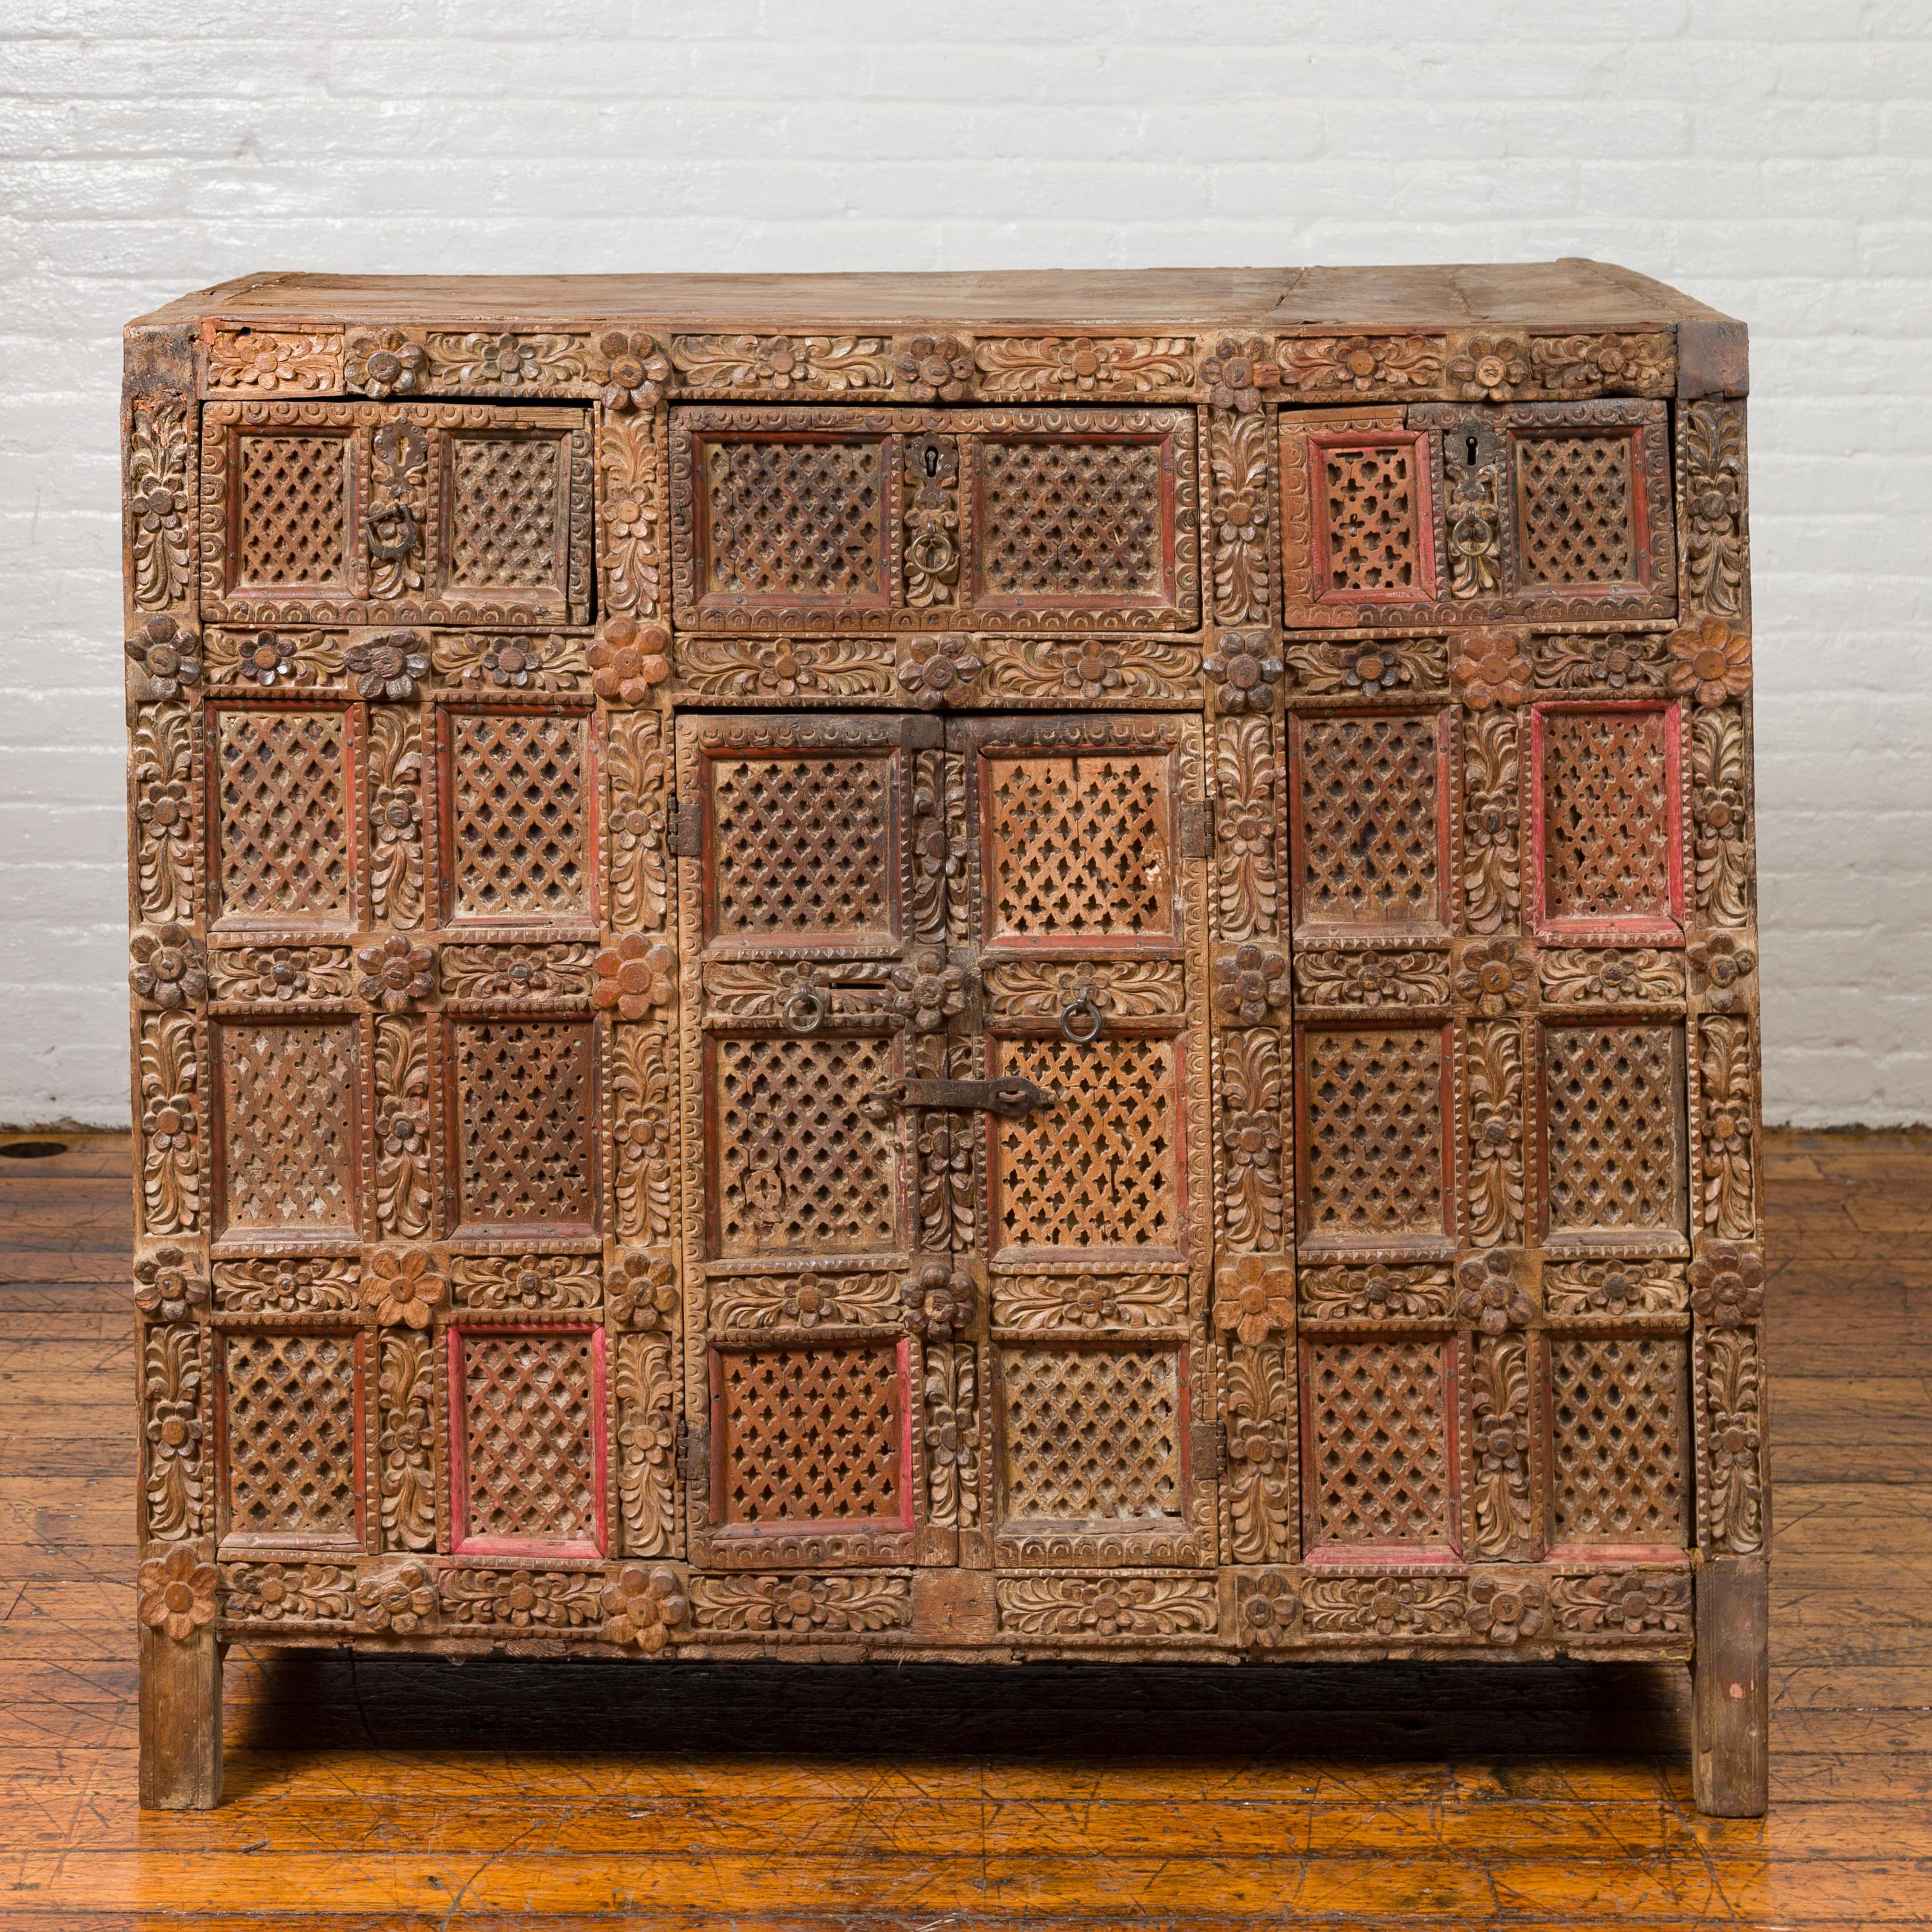 A large antique Indian rubbed wood palace cabinet from the 19th century, with floral-carved décor, pierced motifs and red patina. Born in India during the 19th century, this palace cabinet attracts our attention with its richly carved façade and